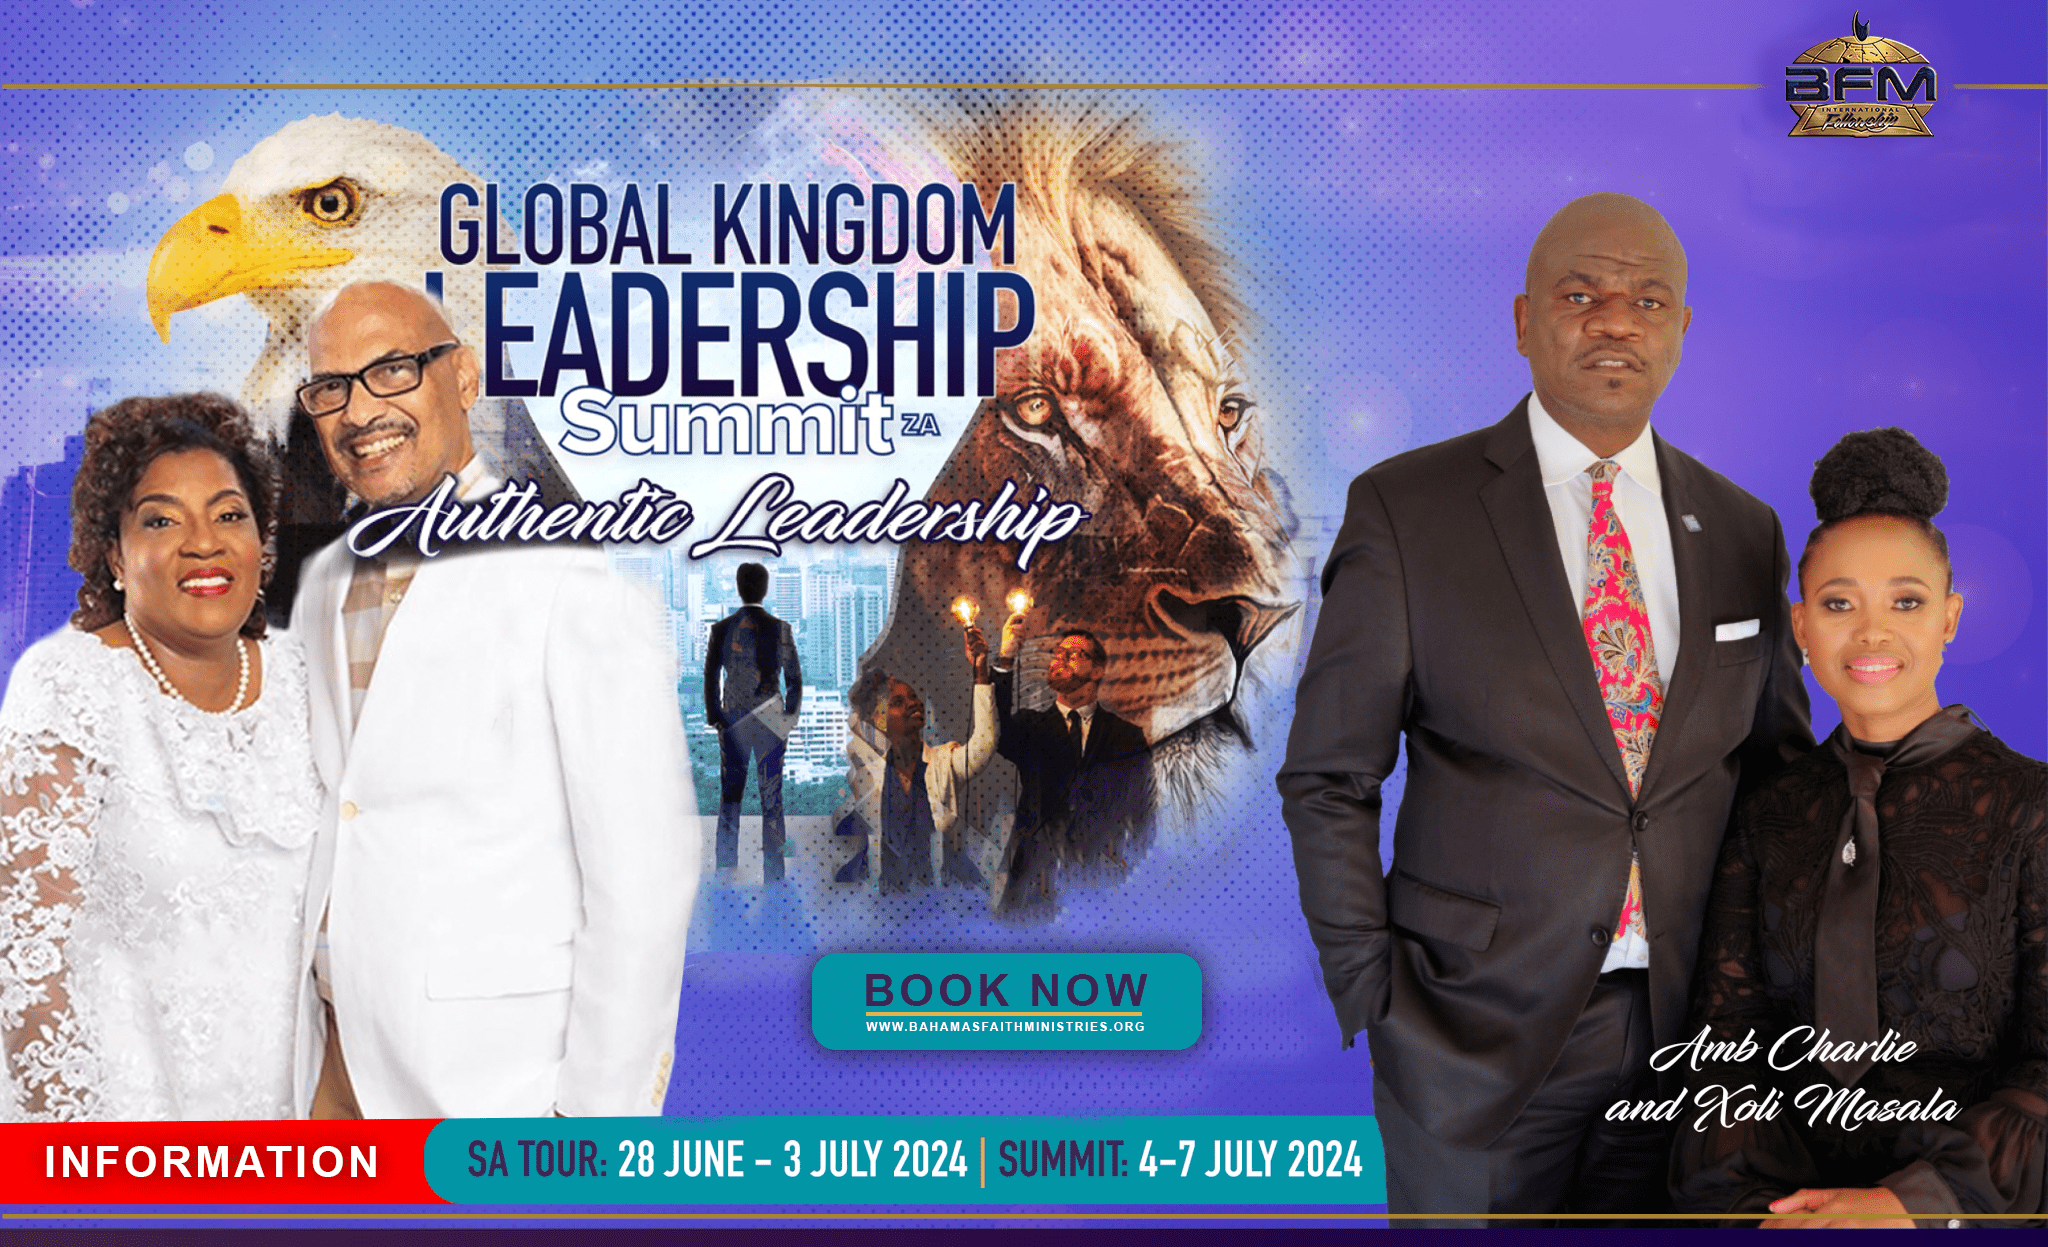 Global Kingdom Leadership Summit and Tour, South Africa